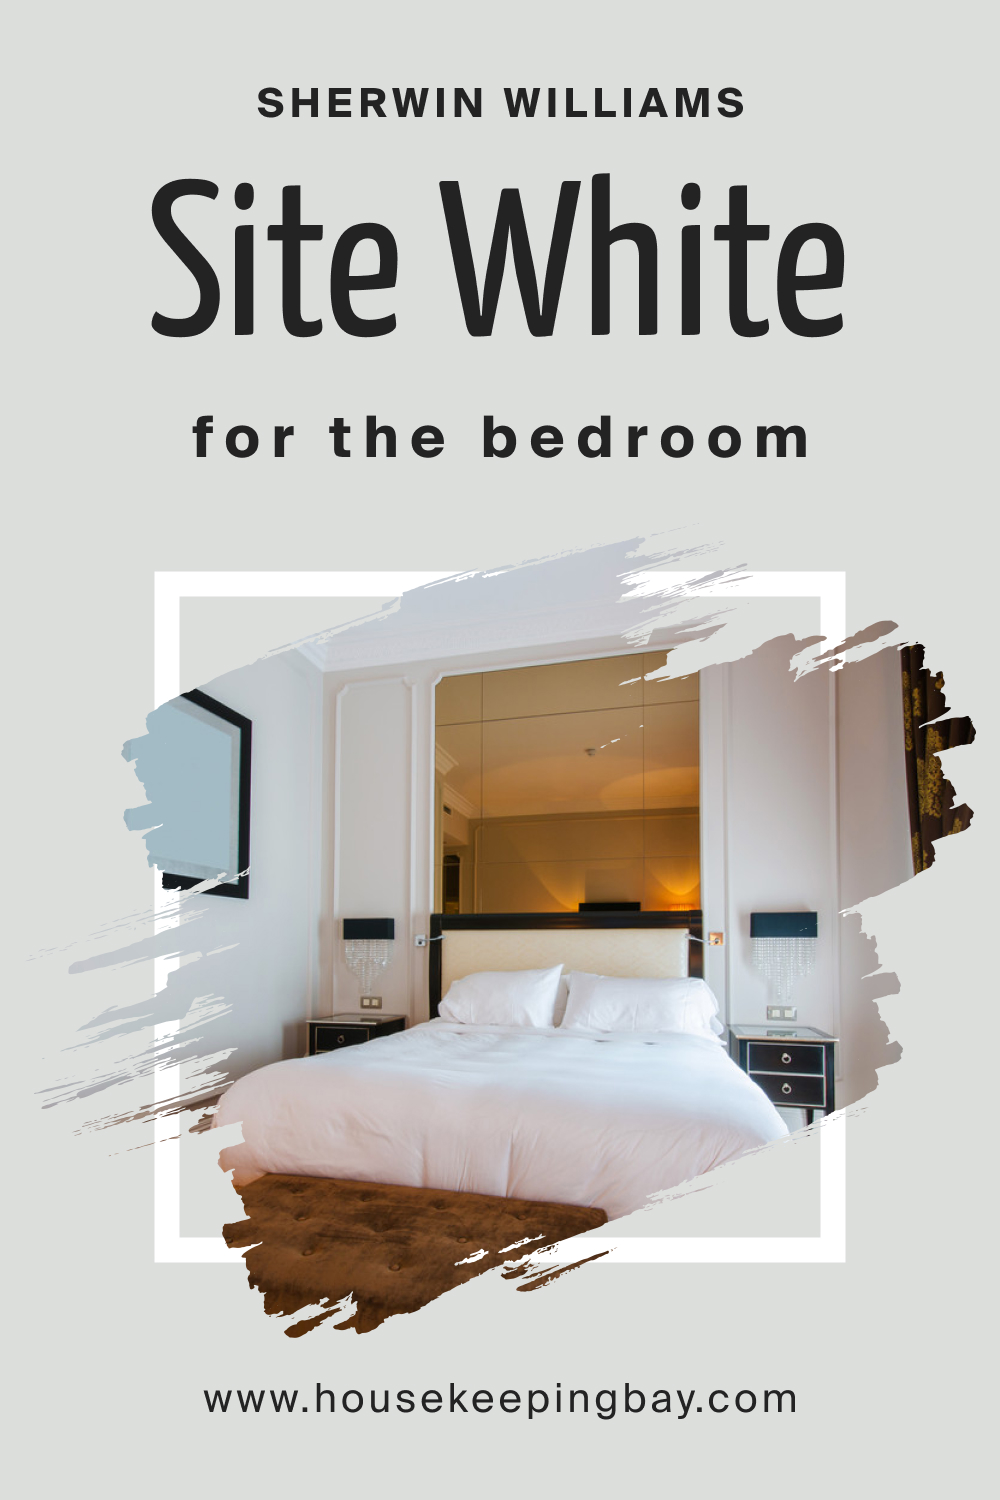 Sherwin Williams. SW Site White For the bedroom